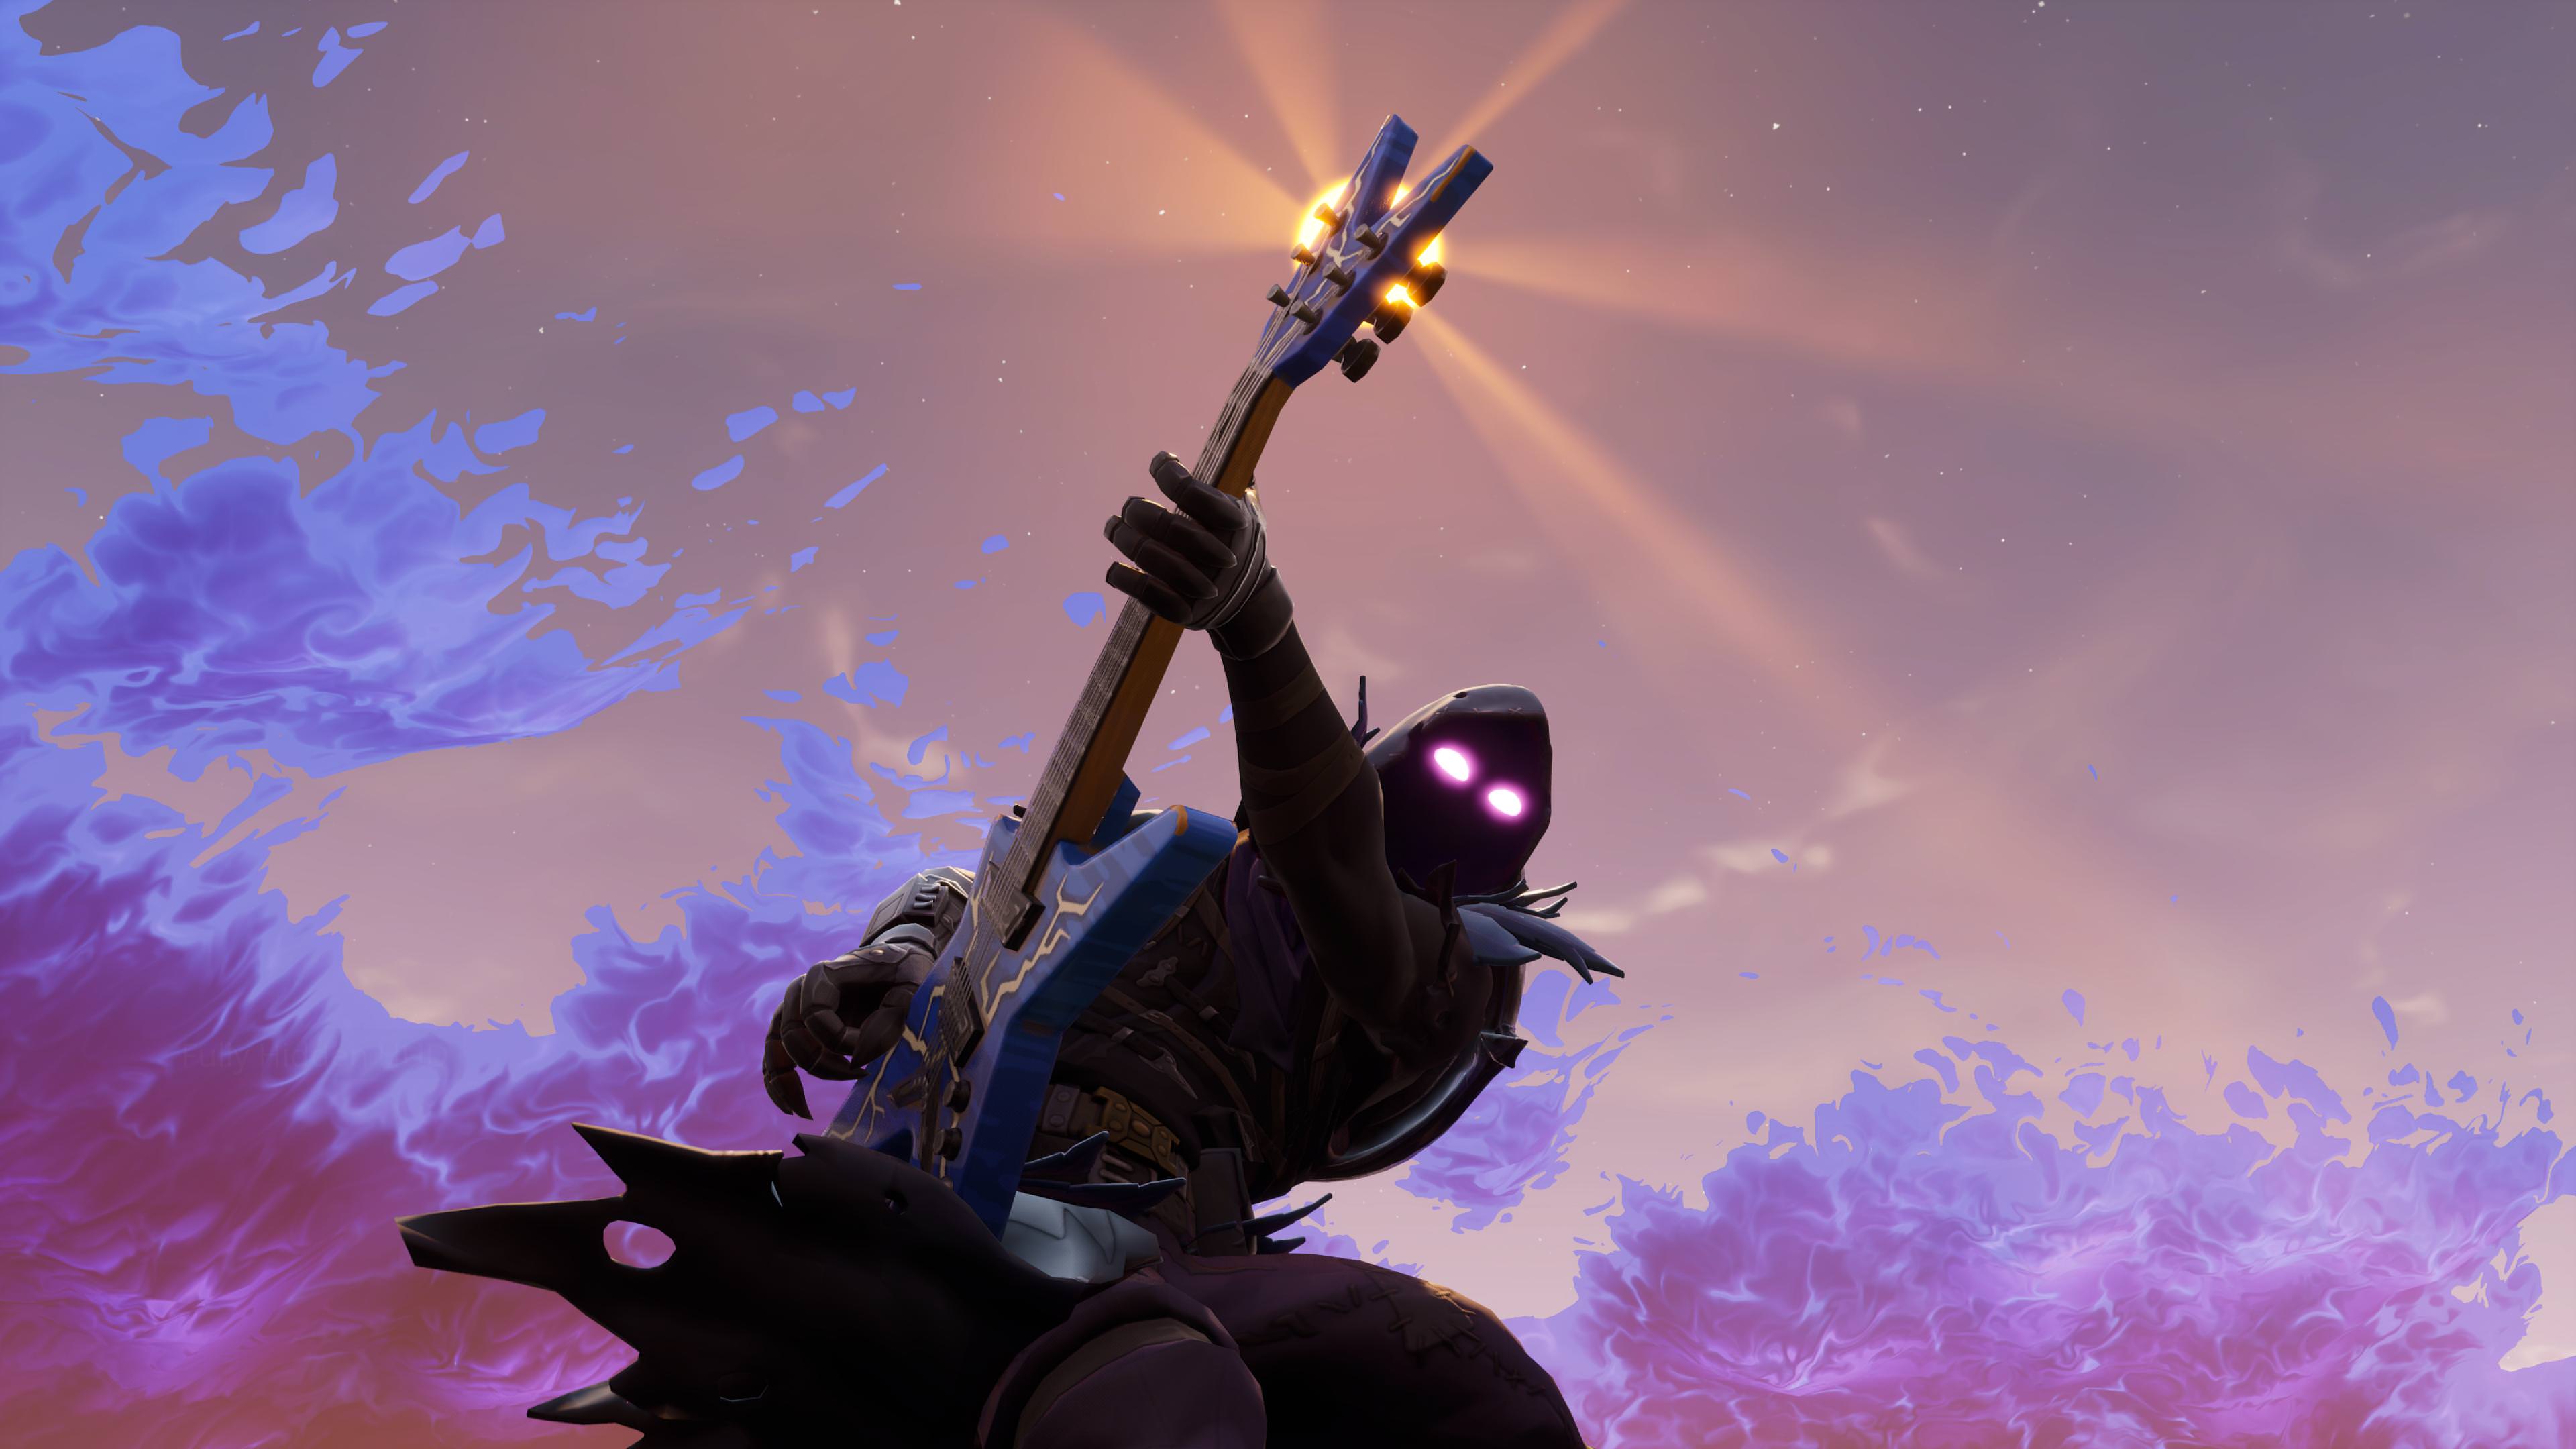 Raven Rock Out Fortnite Battle Royale Wallpaper and Free